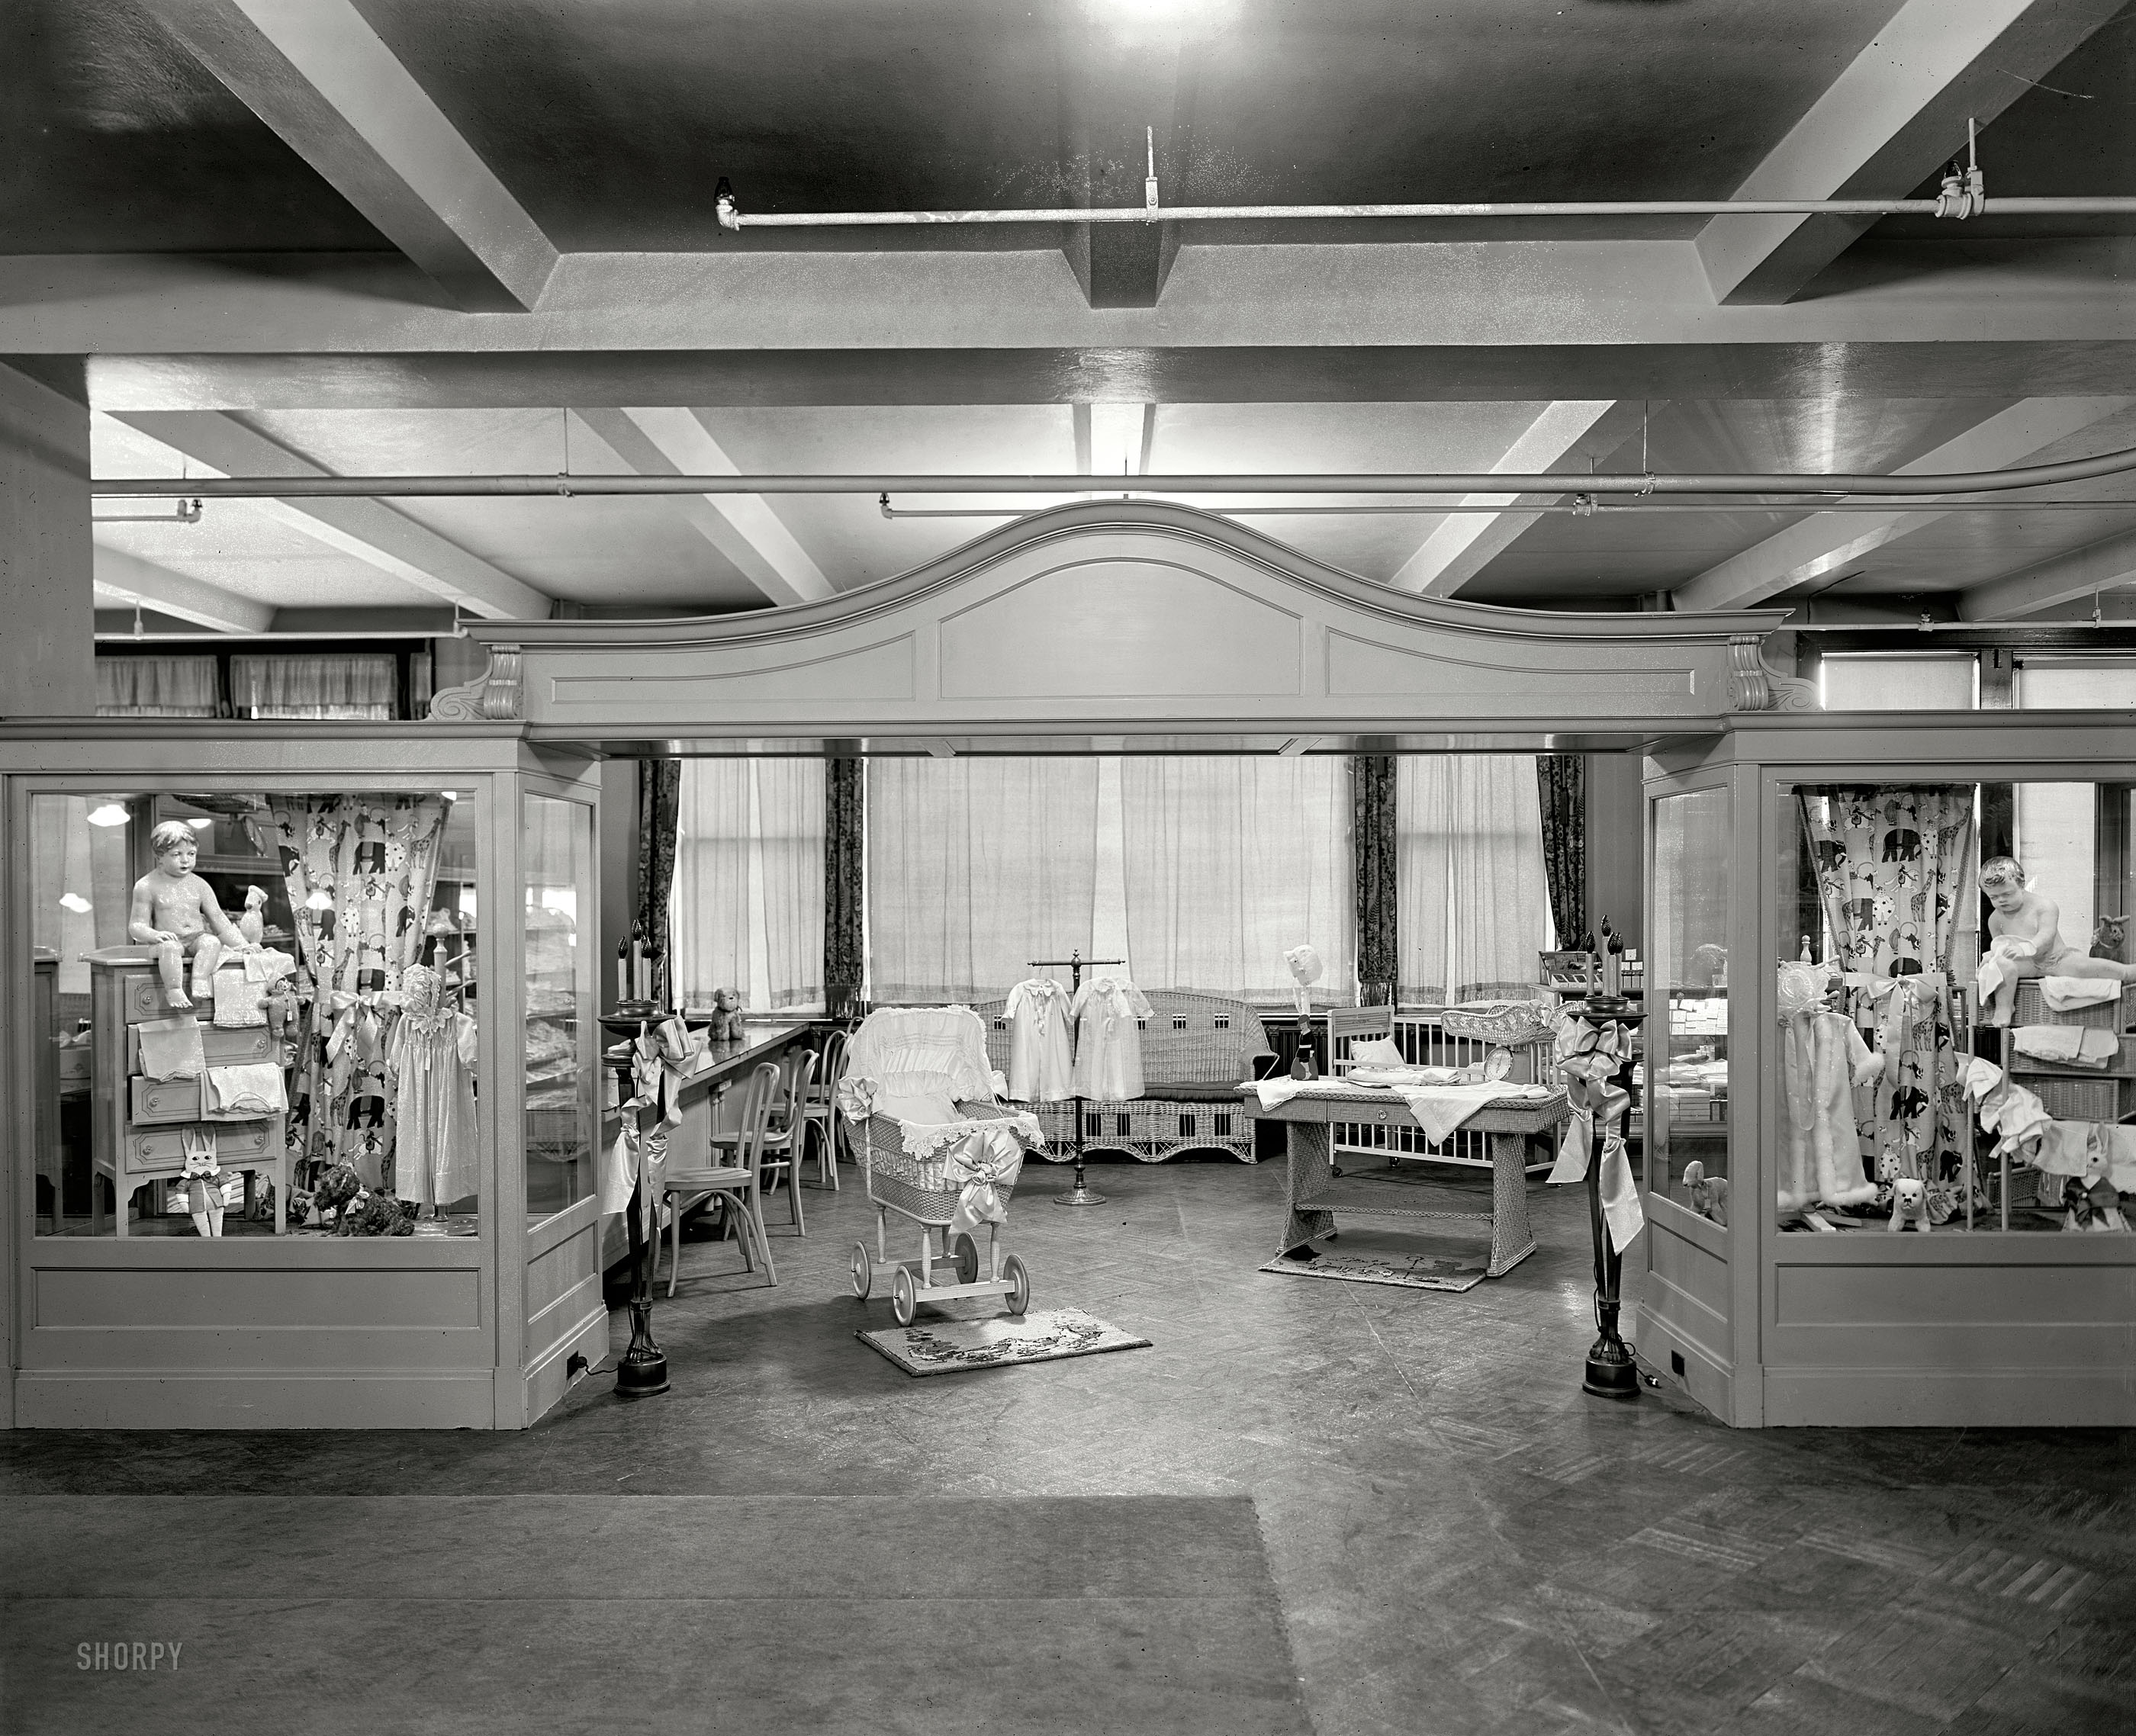 Washington, D.C. "Woodward & Lothrop Children's Dept., 1927." The latest in our series of vaguely unsettling retail displays. National Photo. View full size.